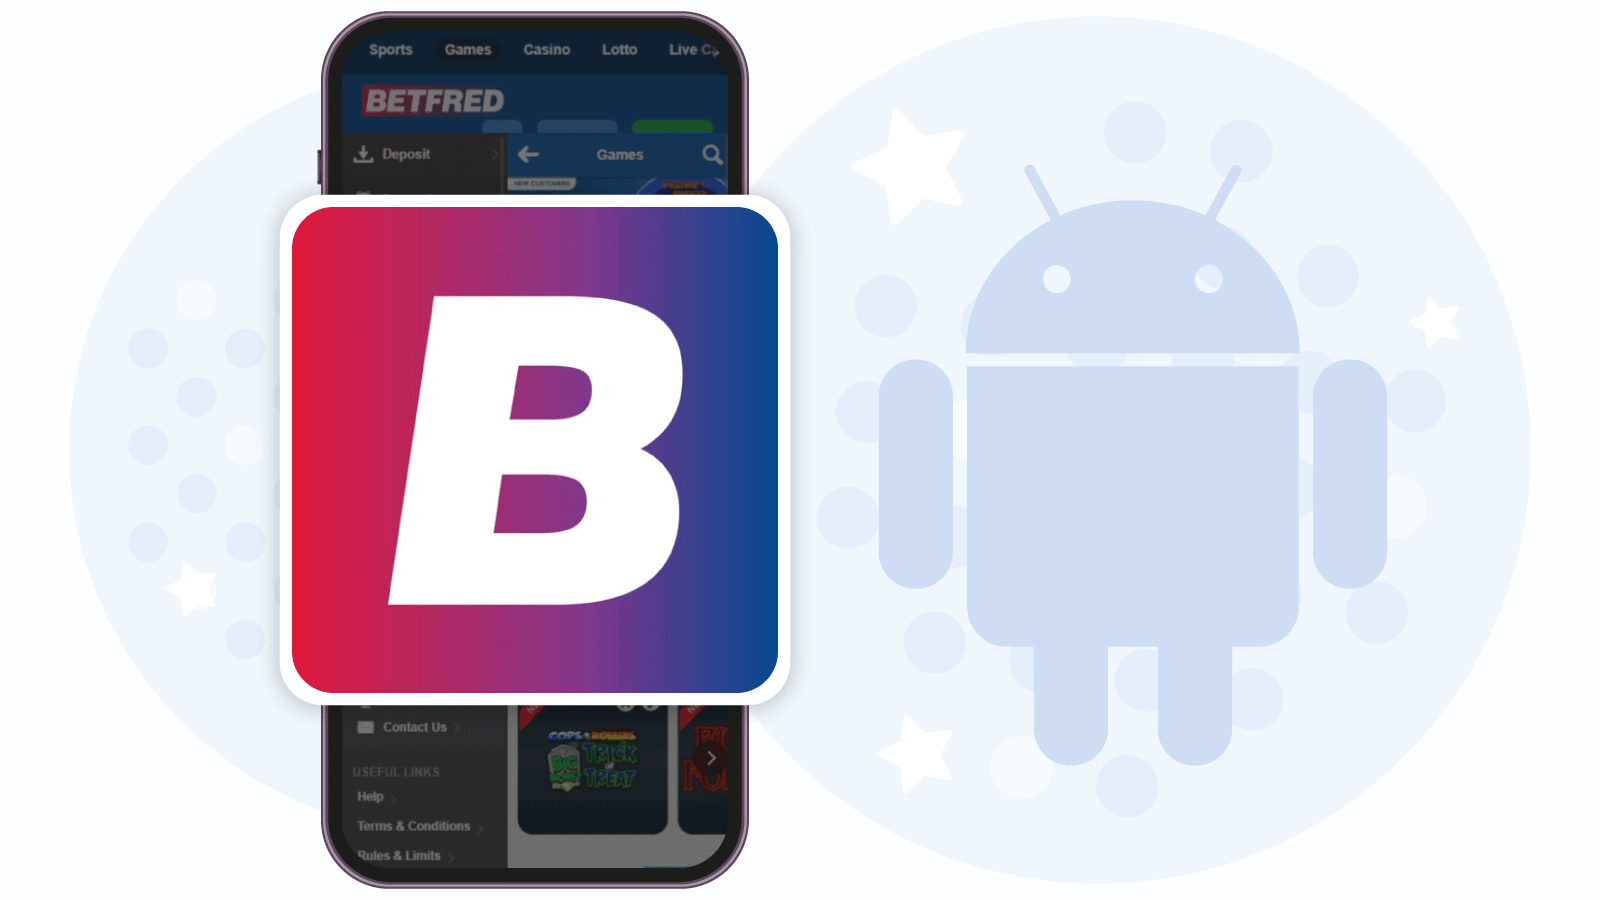 Betfred Casino – Best Mobile Casino App for Android